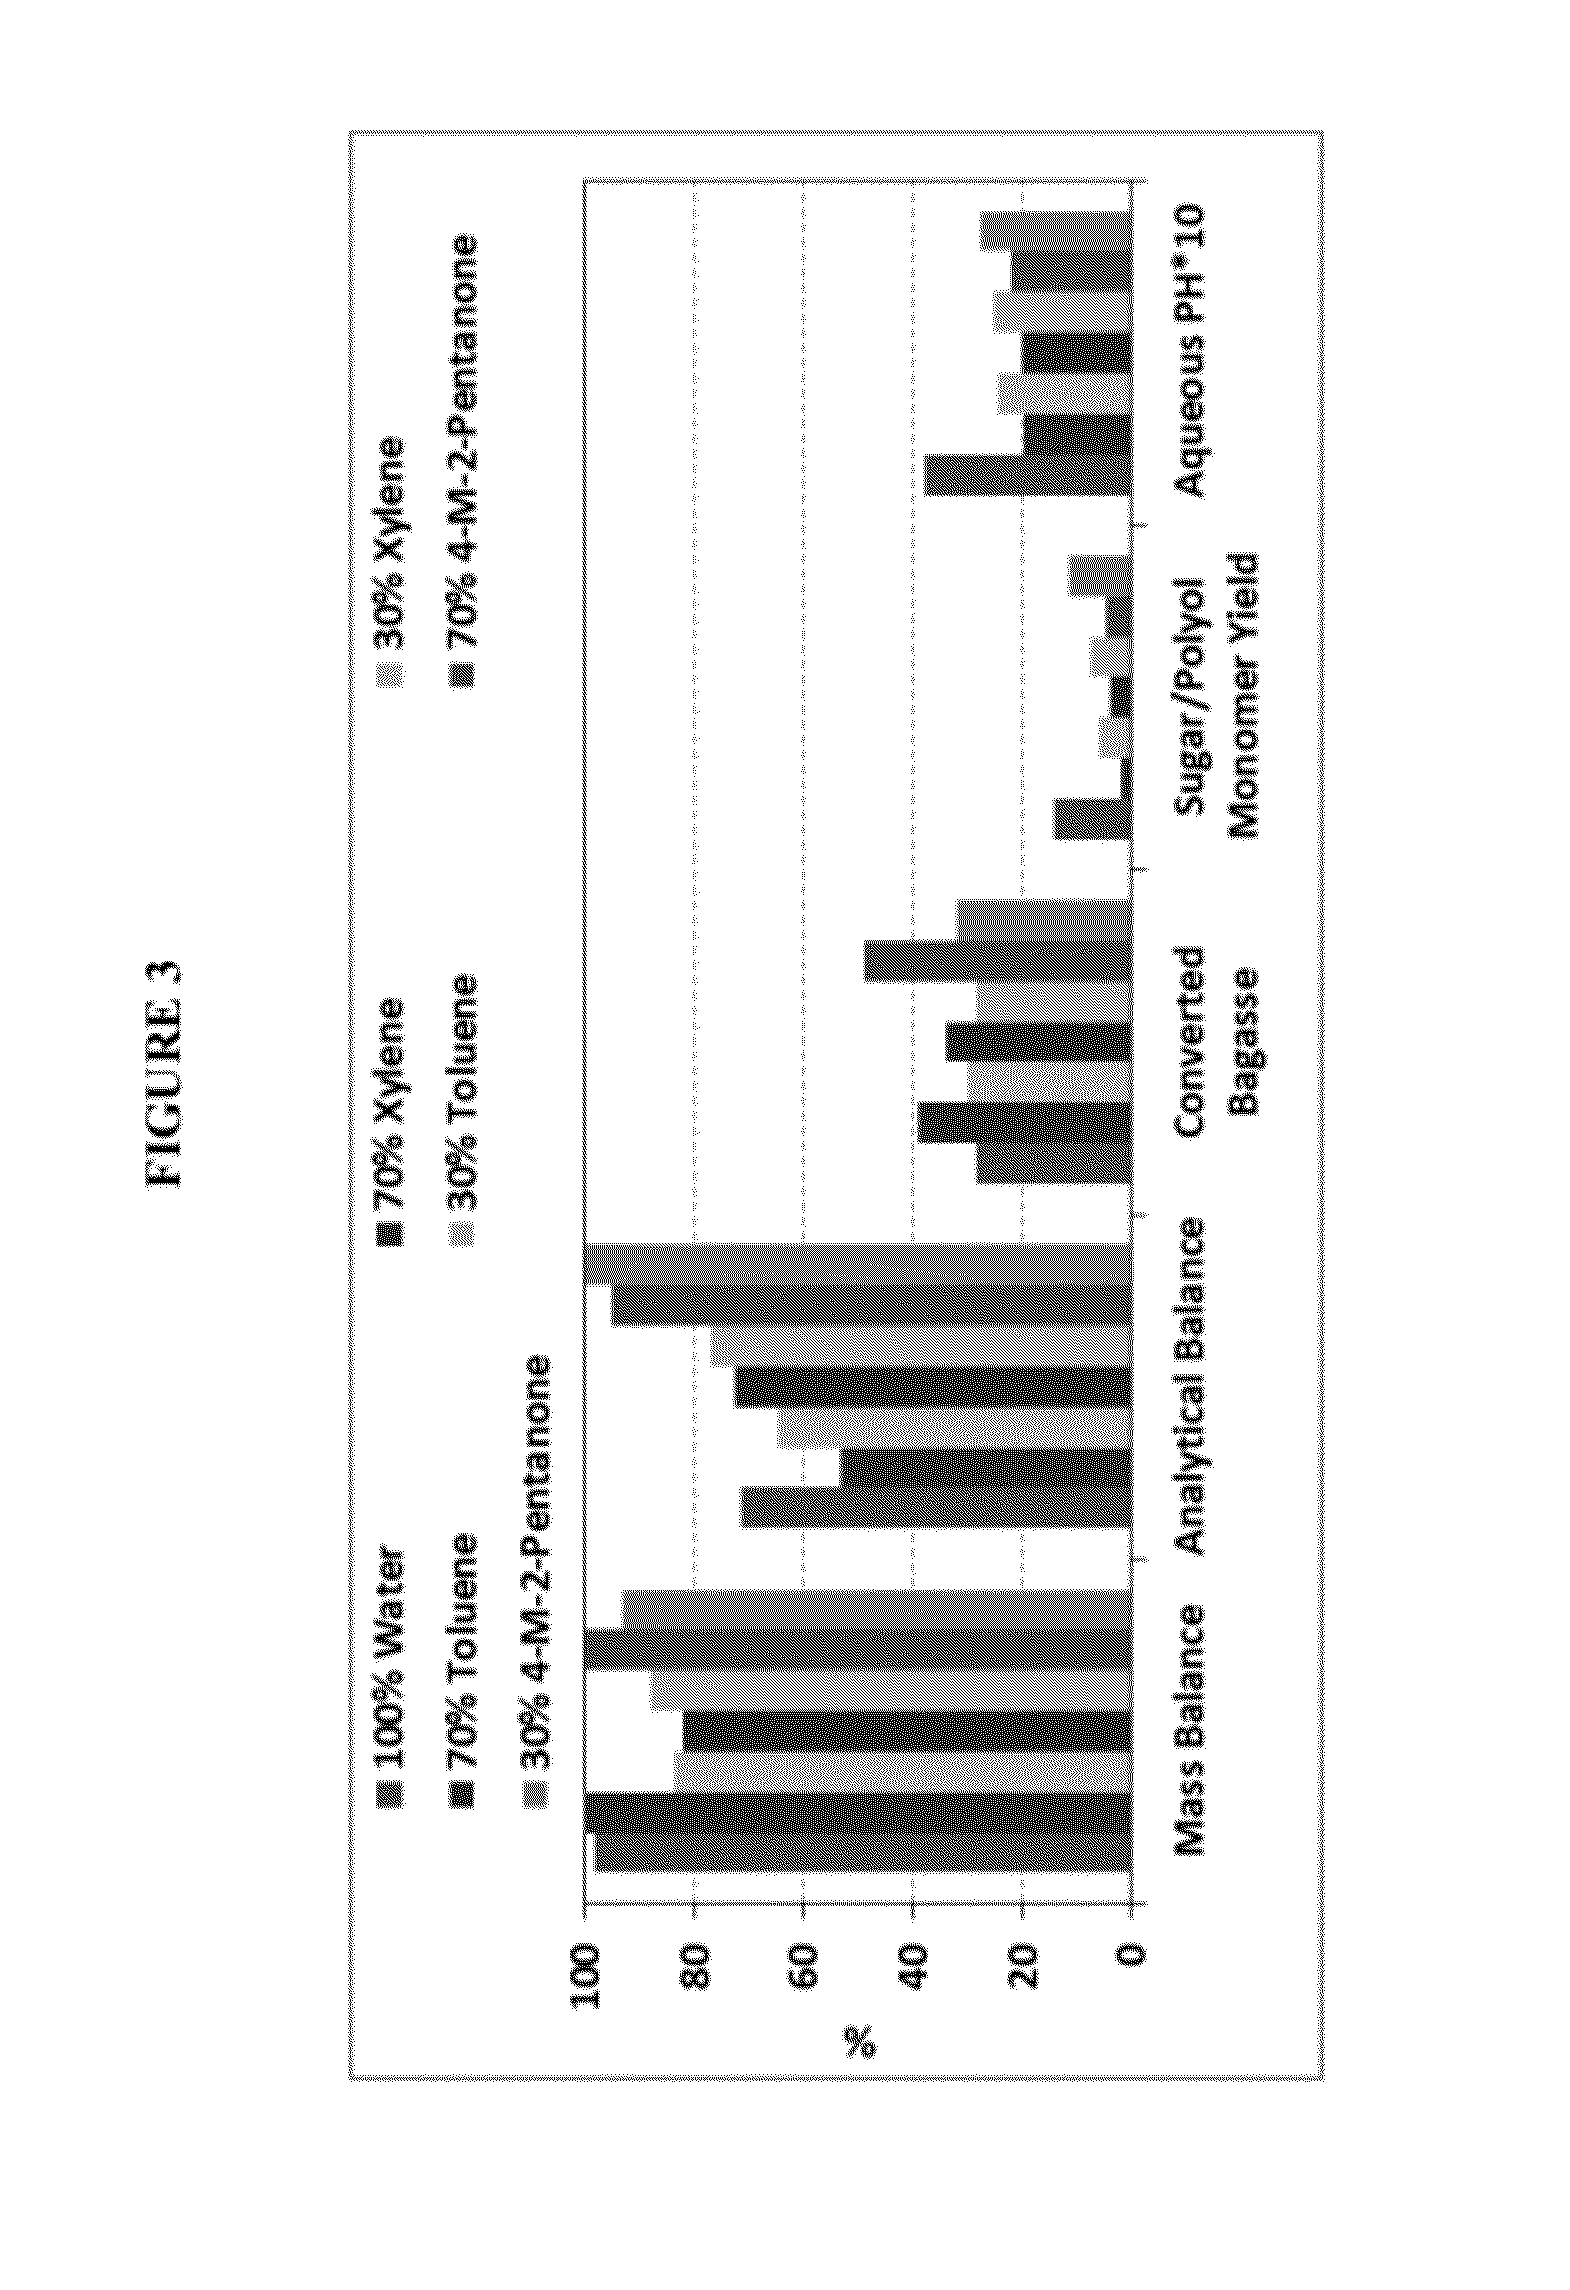 Methods for biomass Deconstruction and Purification